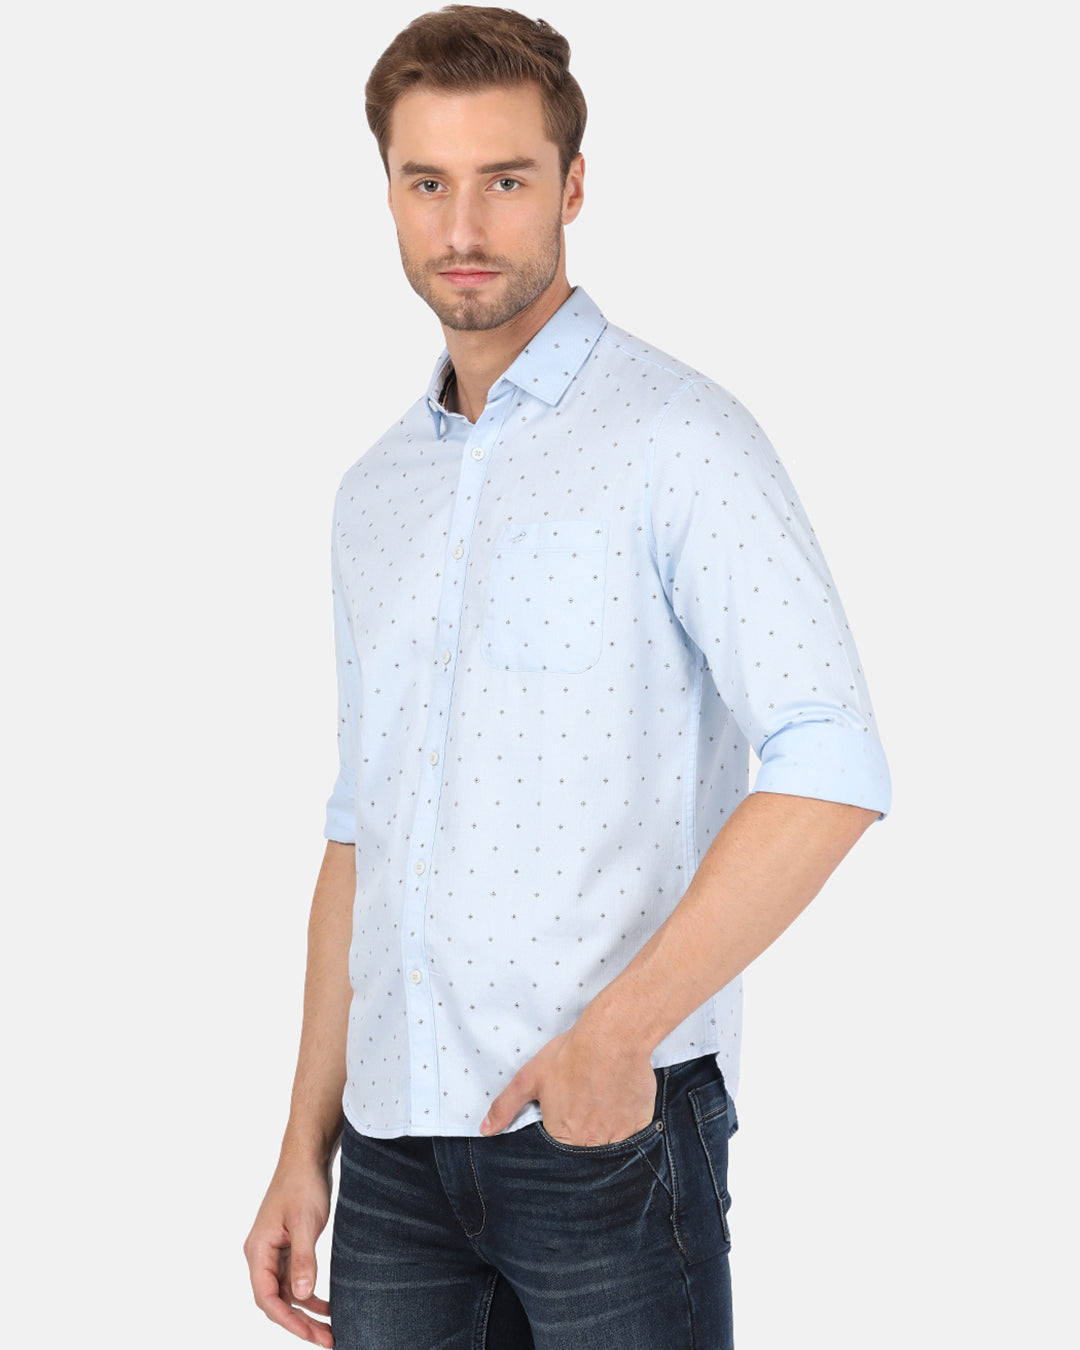 Crocodile Casual Full Sleeve Comfort Fit Printed Light Blue with Collar Shirt for Men